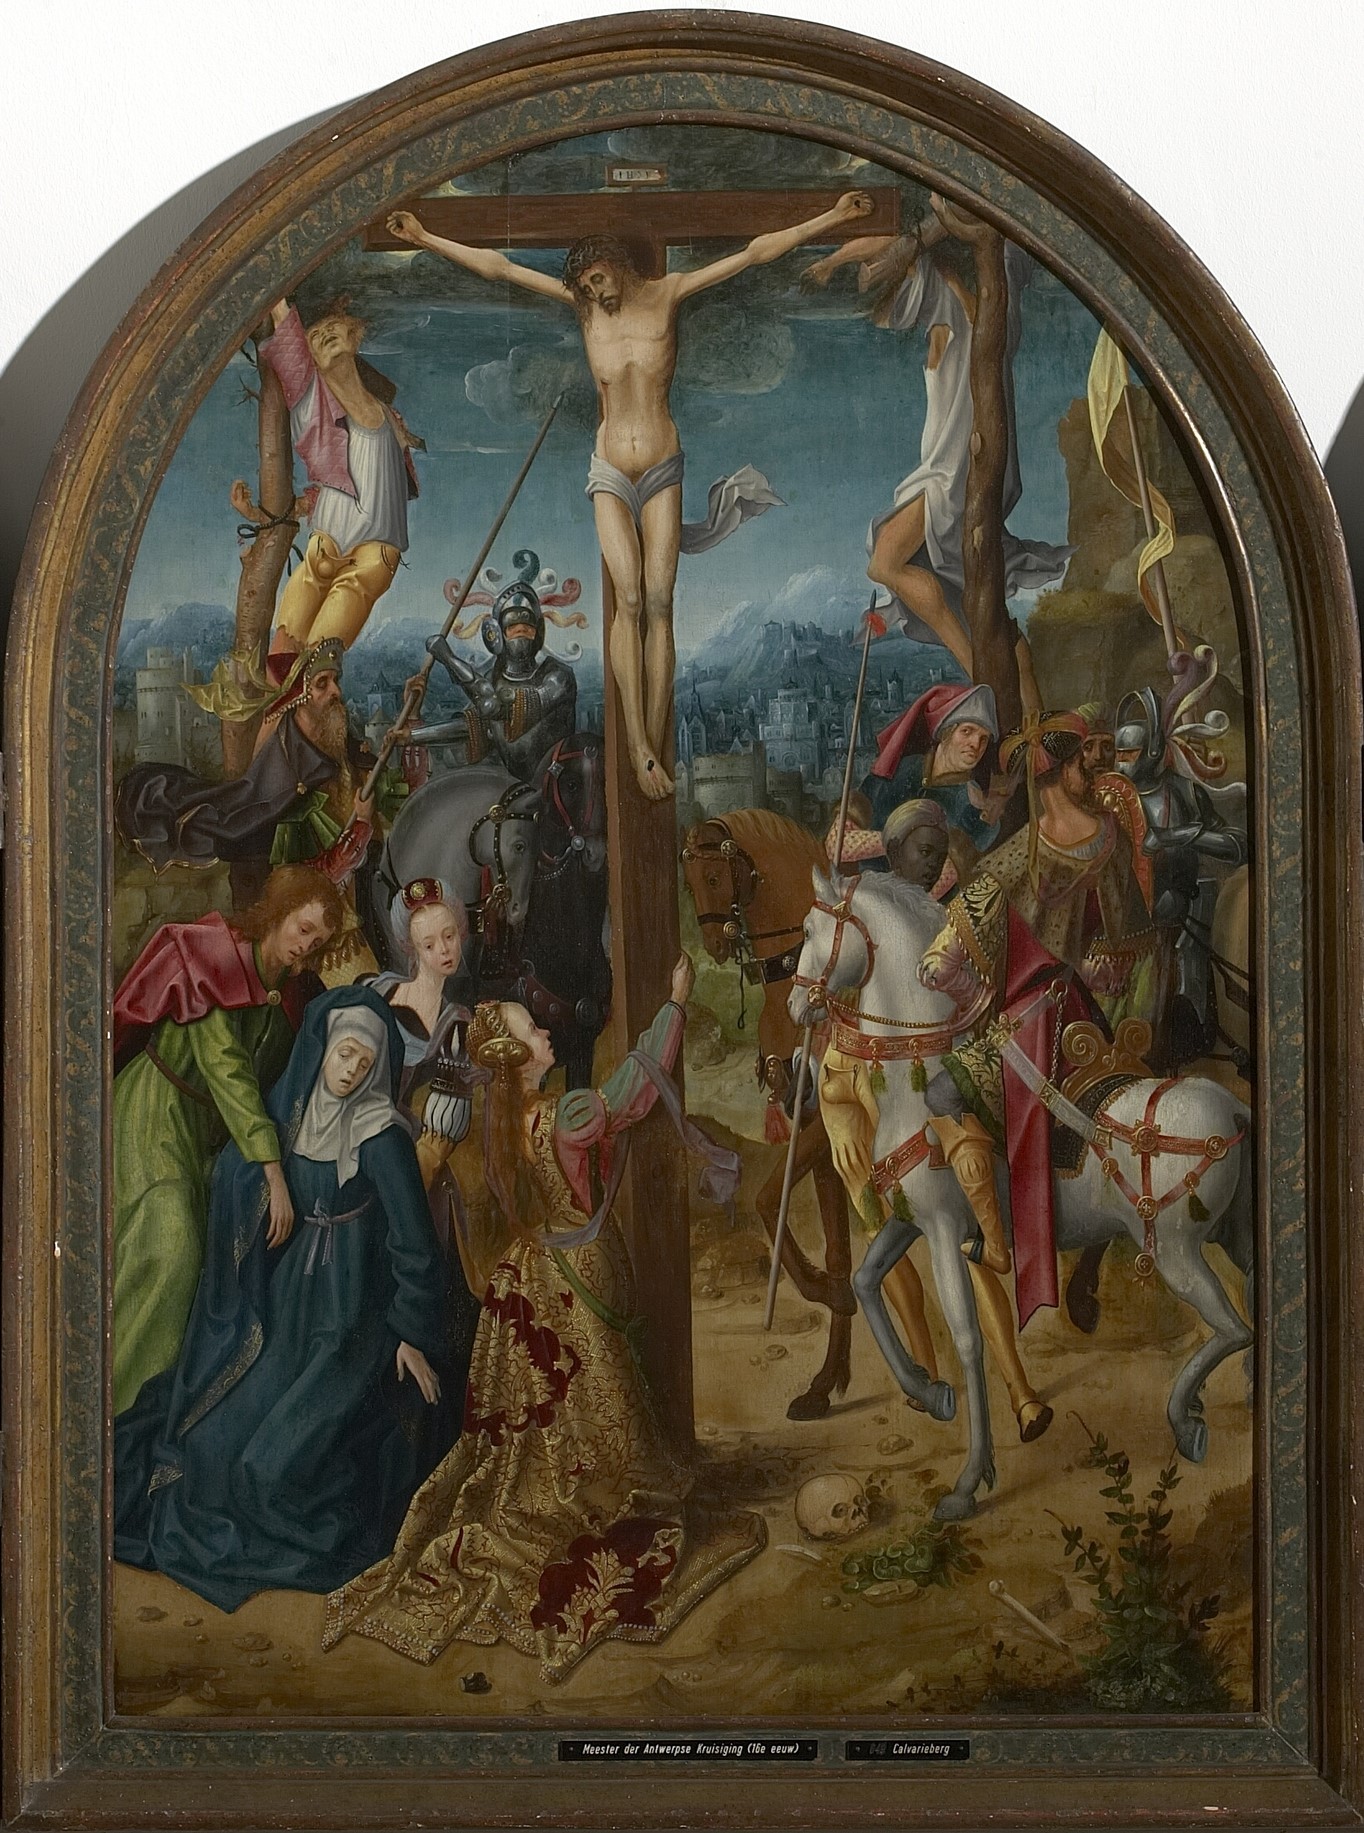 1510 ca Adriaen_van_Overbeke_-crucifixion_with_scenes_of_the_carrying_of_the_cross_and_the_resurrection Maagdenhuismuseum Anvers